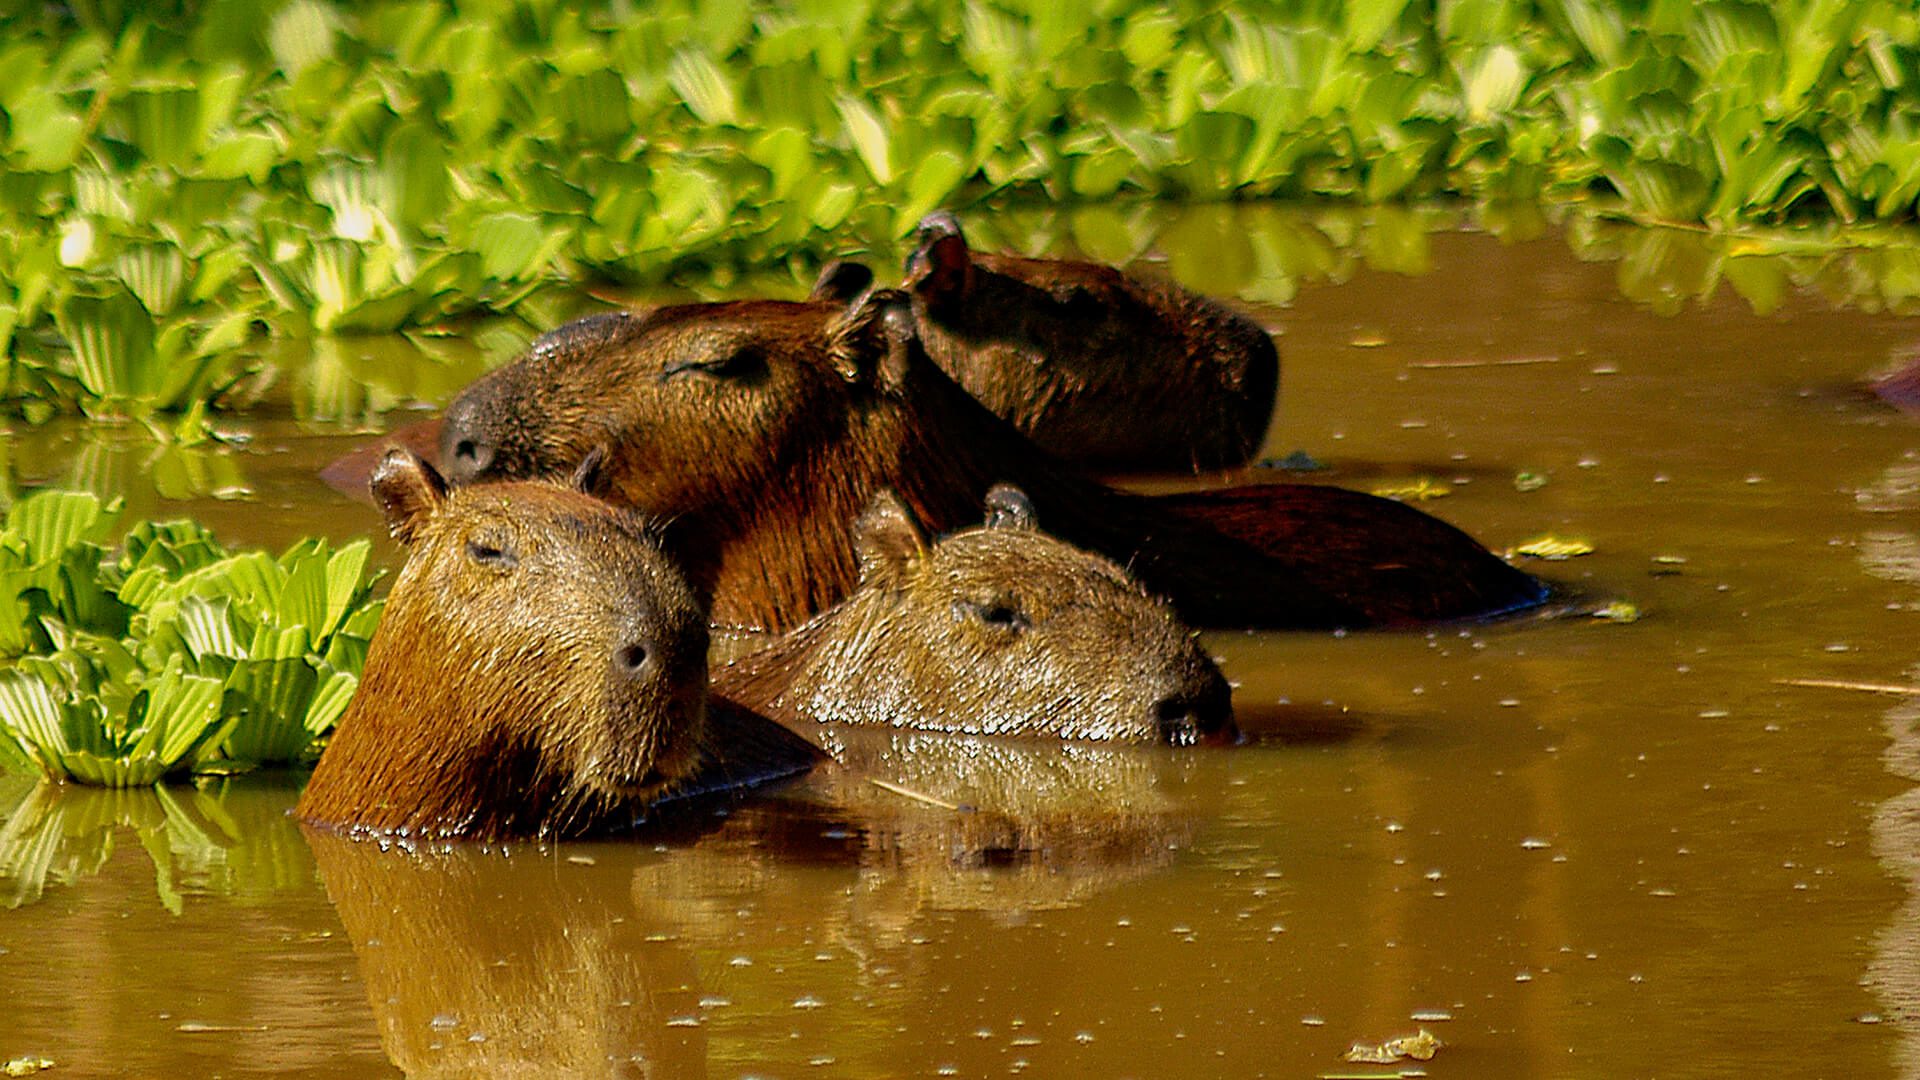 A group of 4 Capibaras in the water among lilies